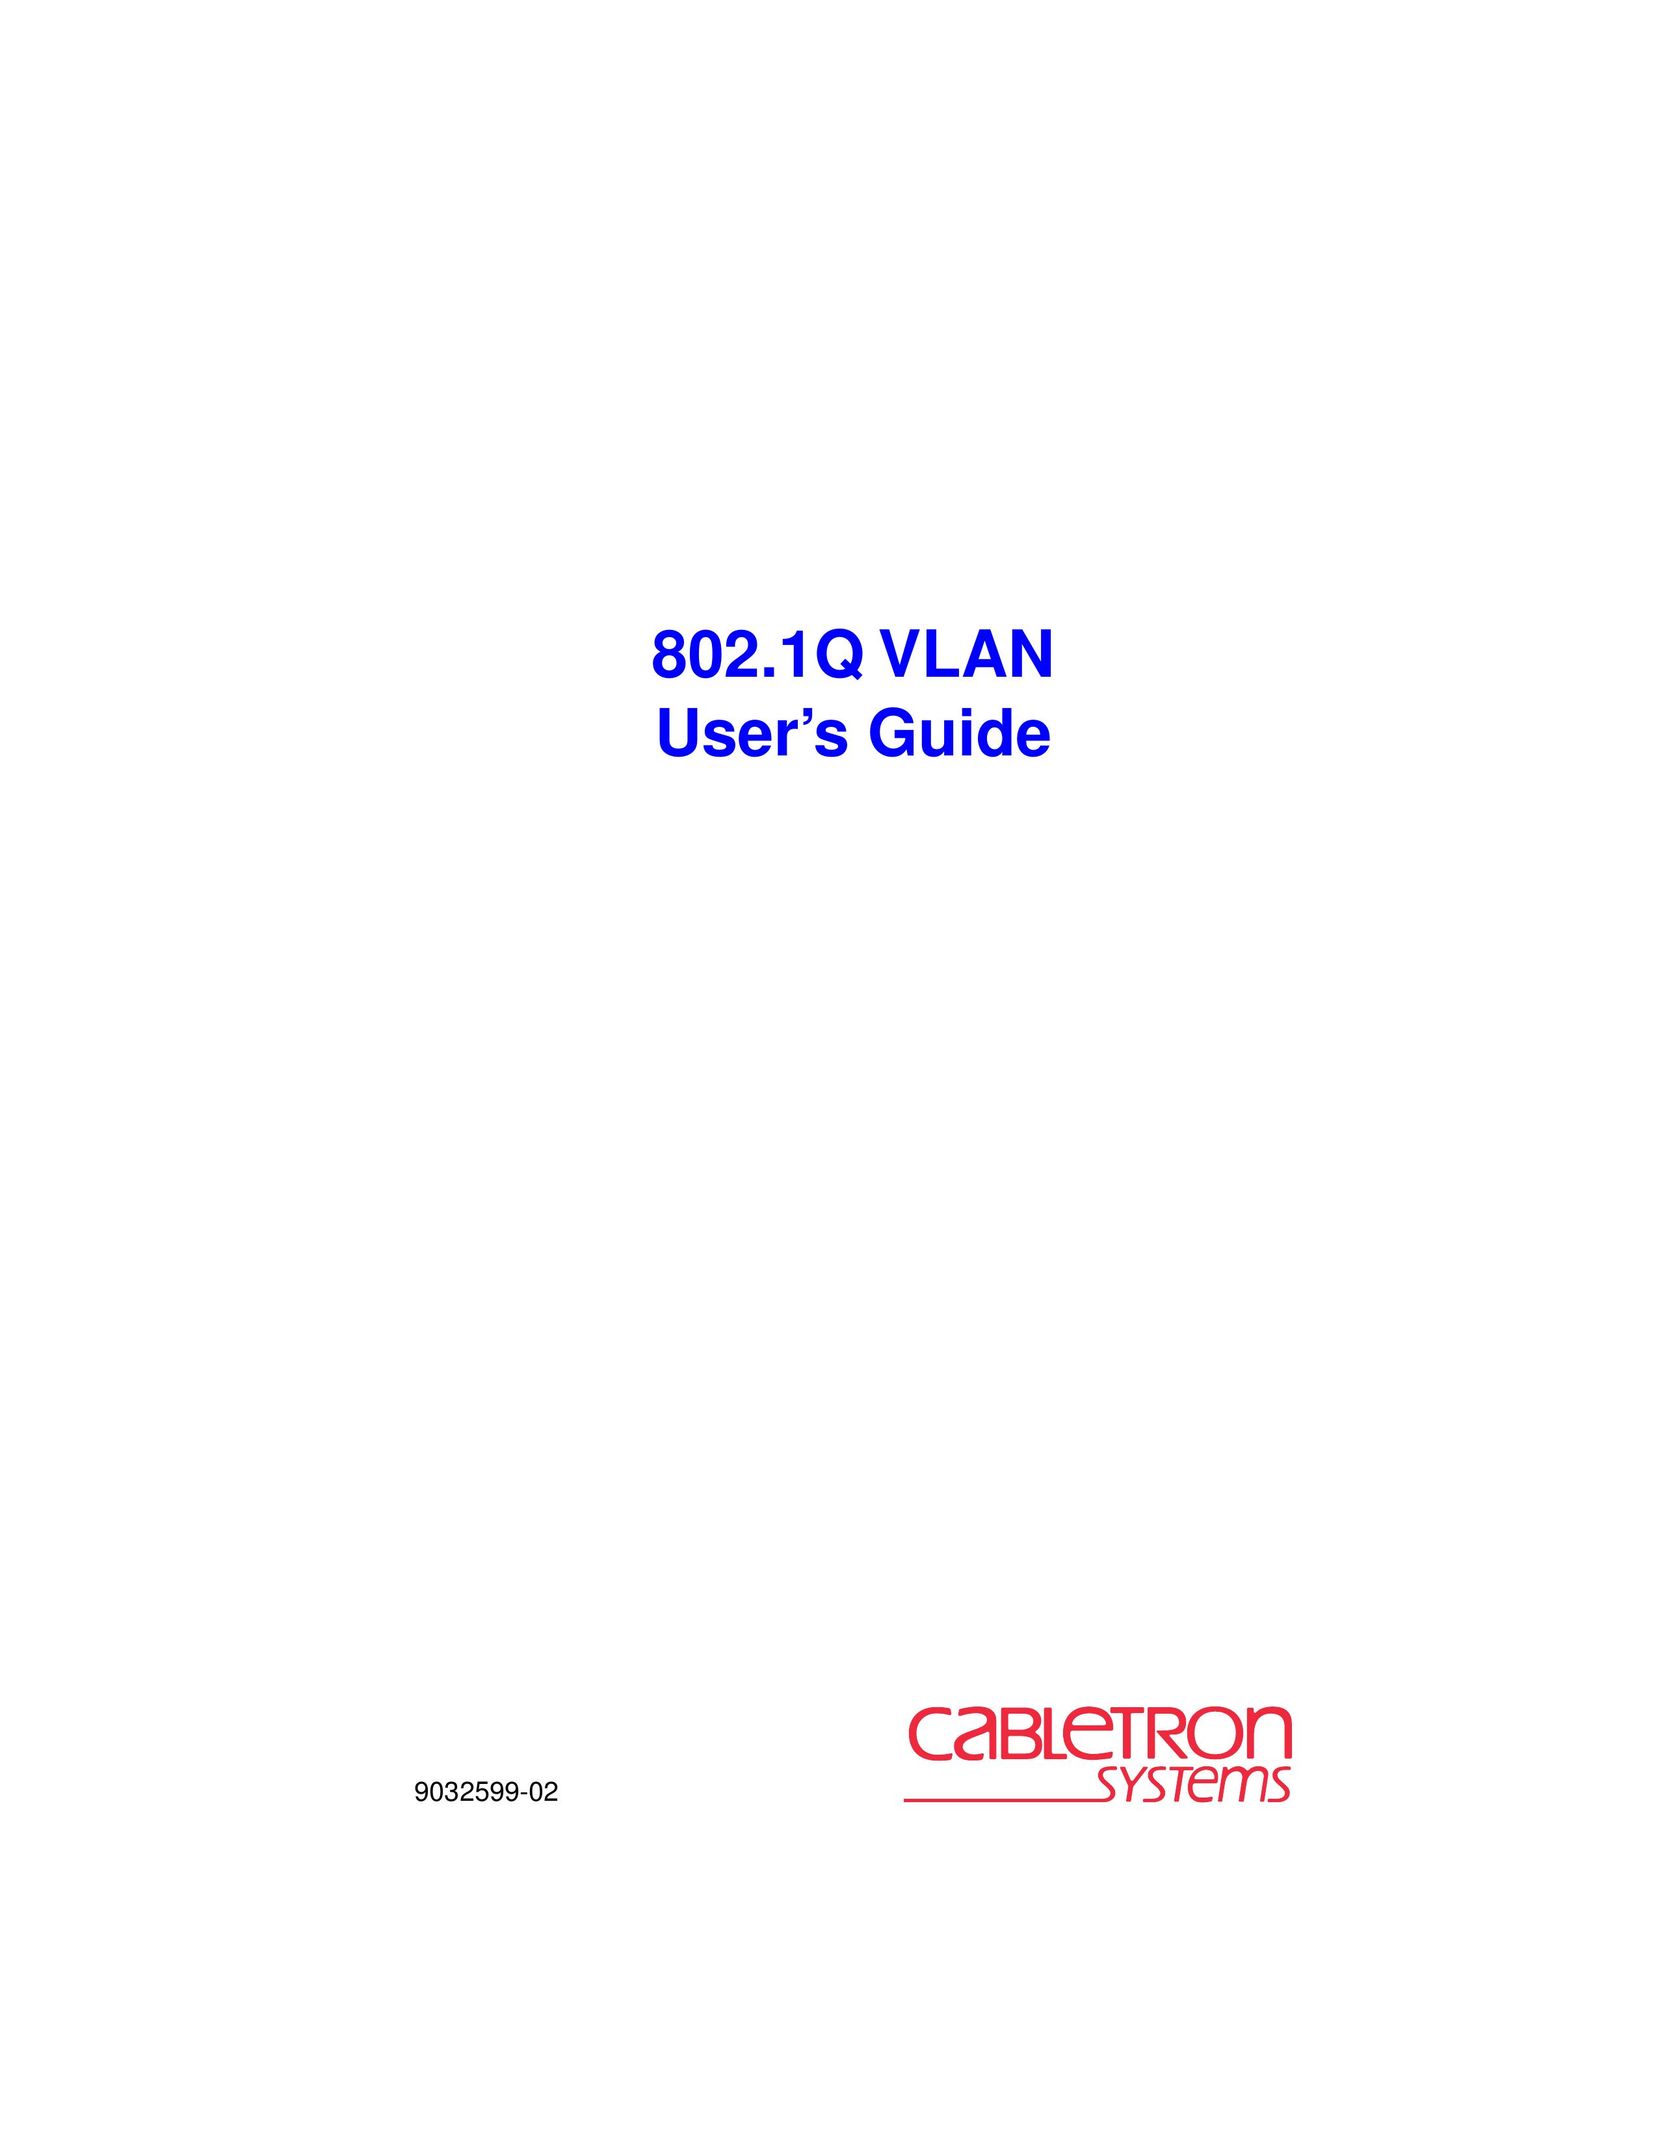 Cabletron Systems 802.1Q Network Card User Manual